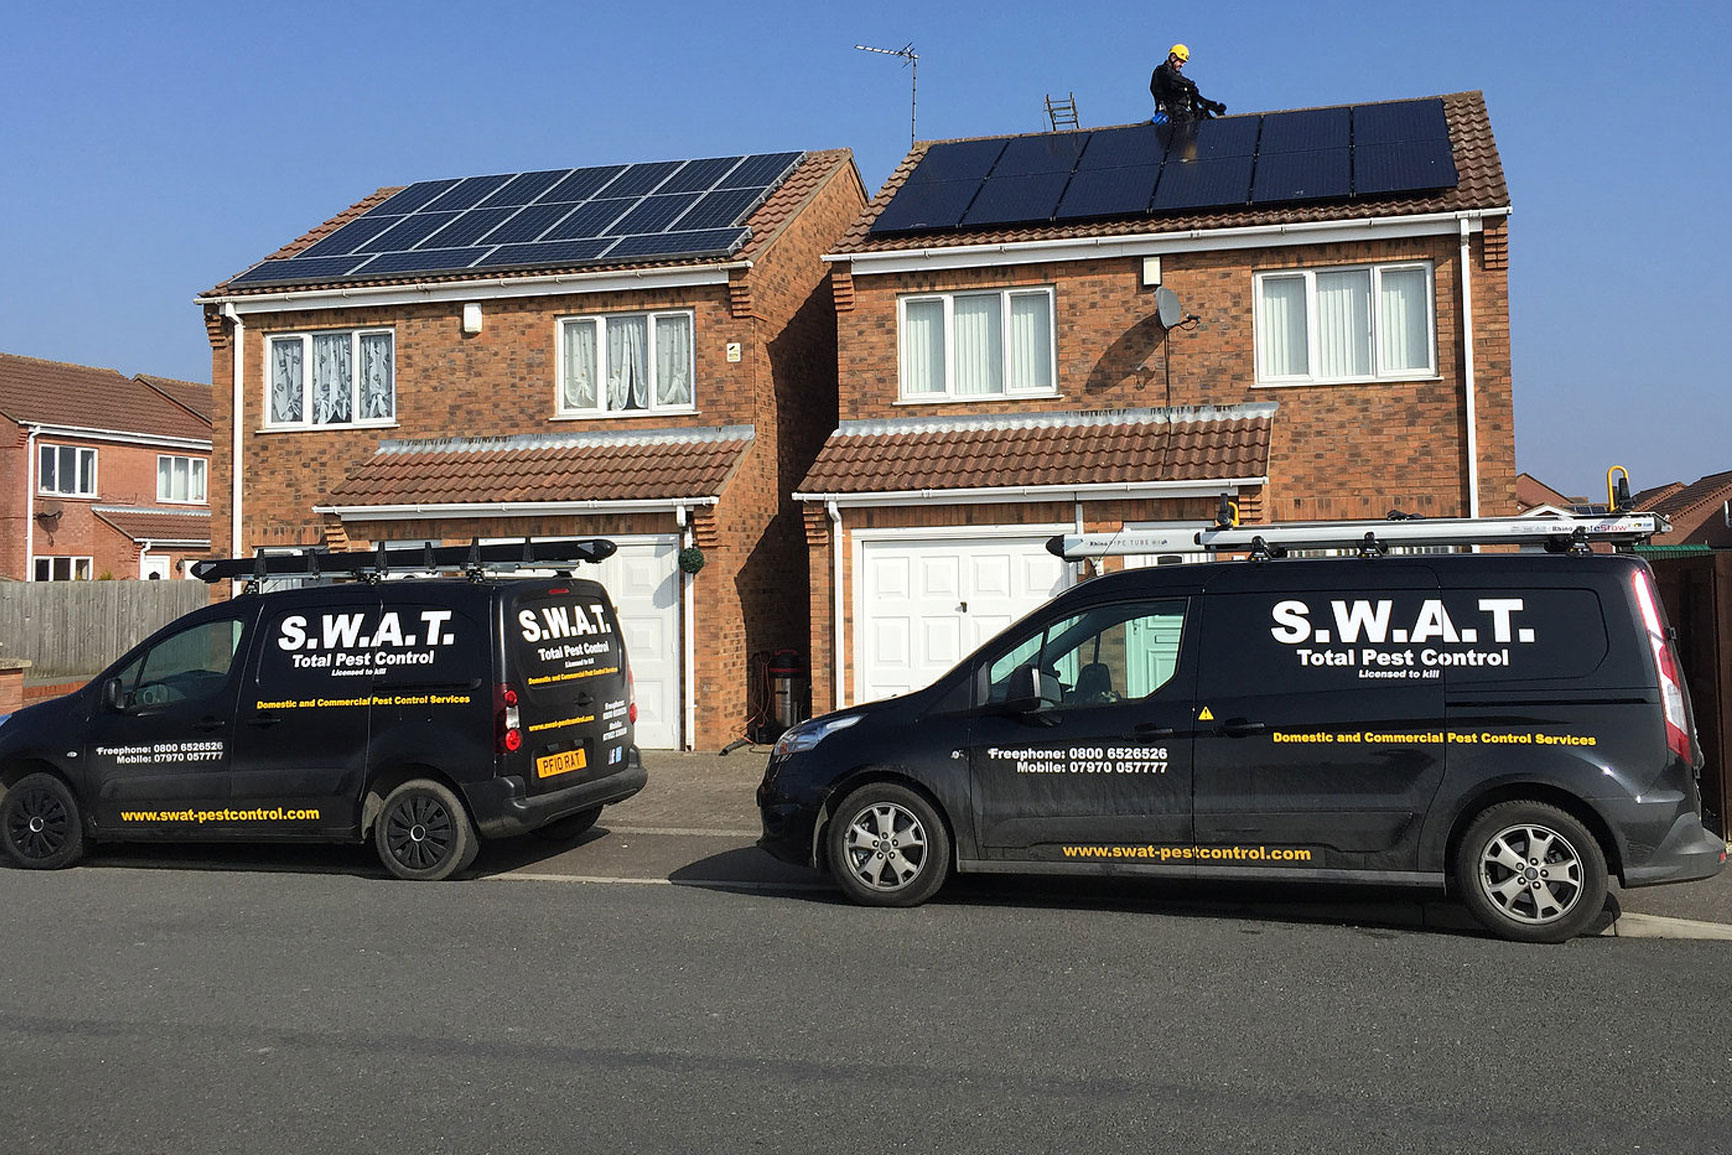 Residential pest control by SWAT Pest Control Ltd.